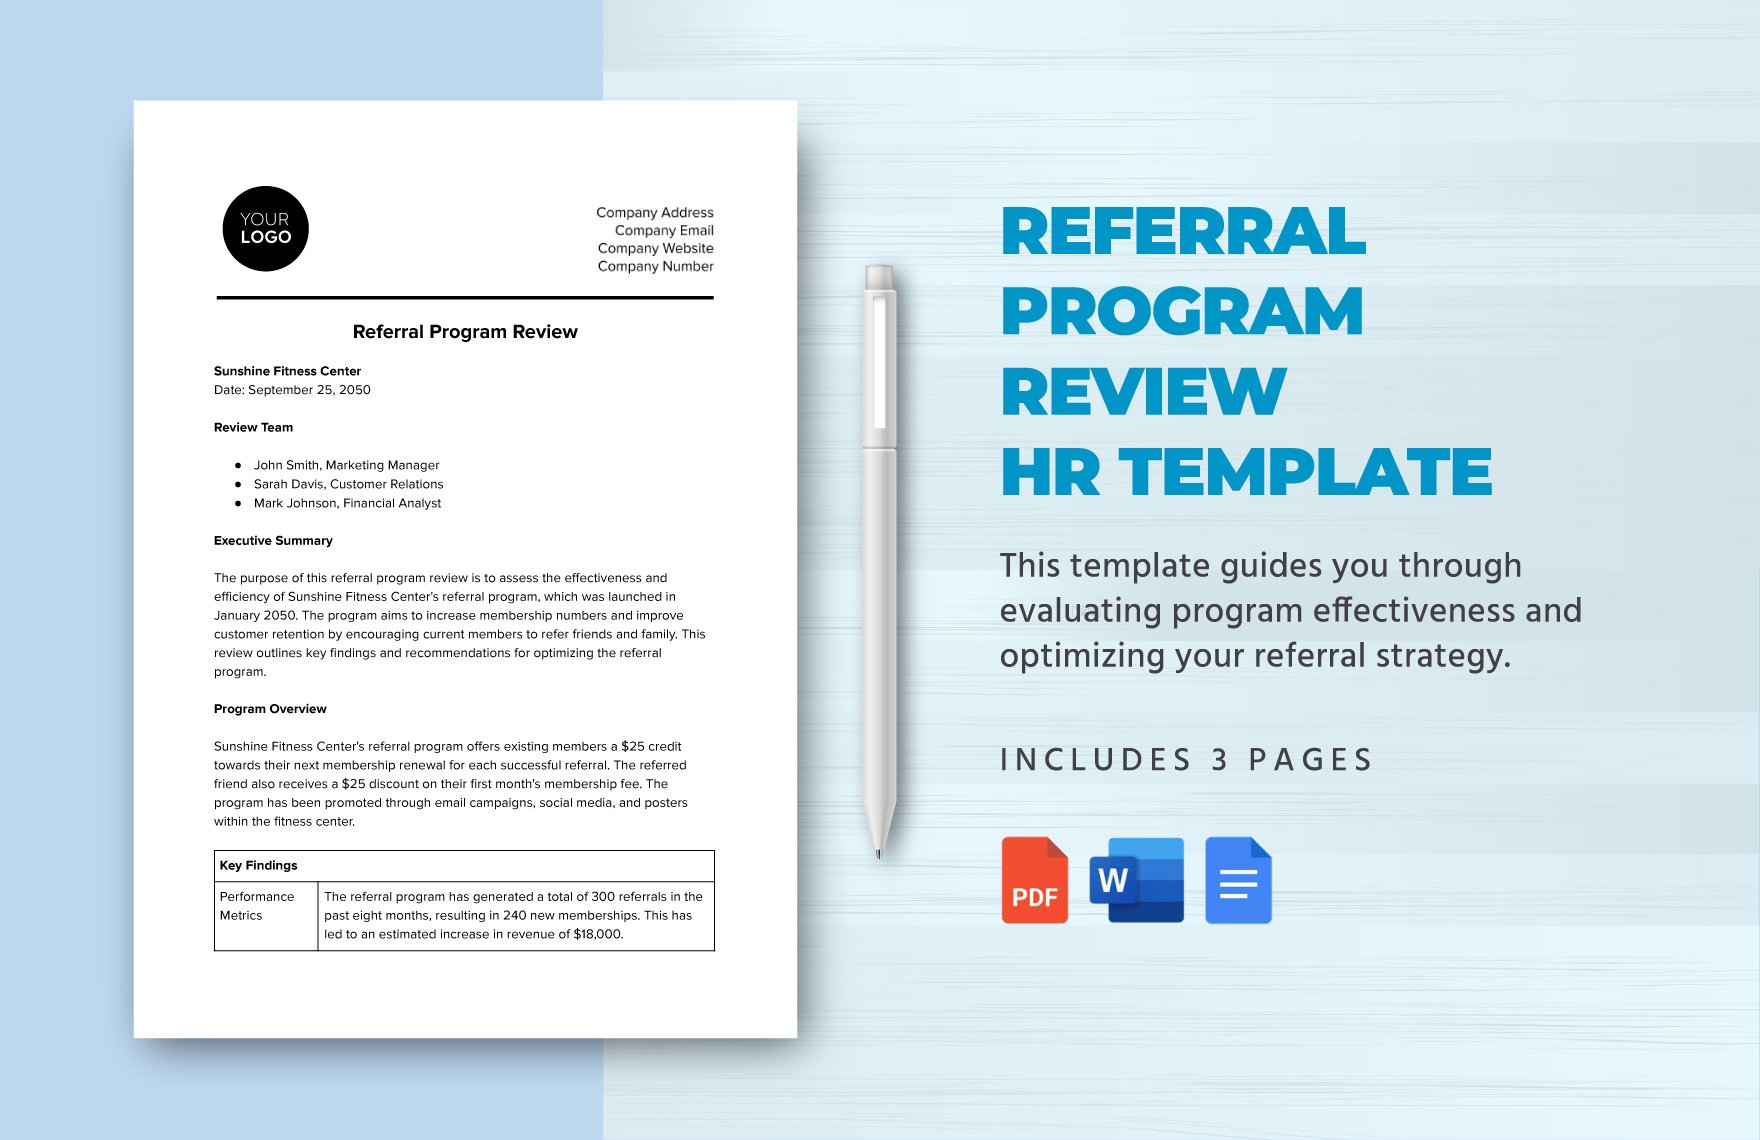 Referral Program Review HR Template in Word, Google Docs, PDF